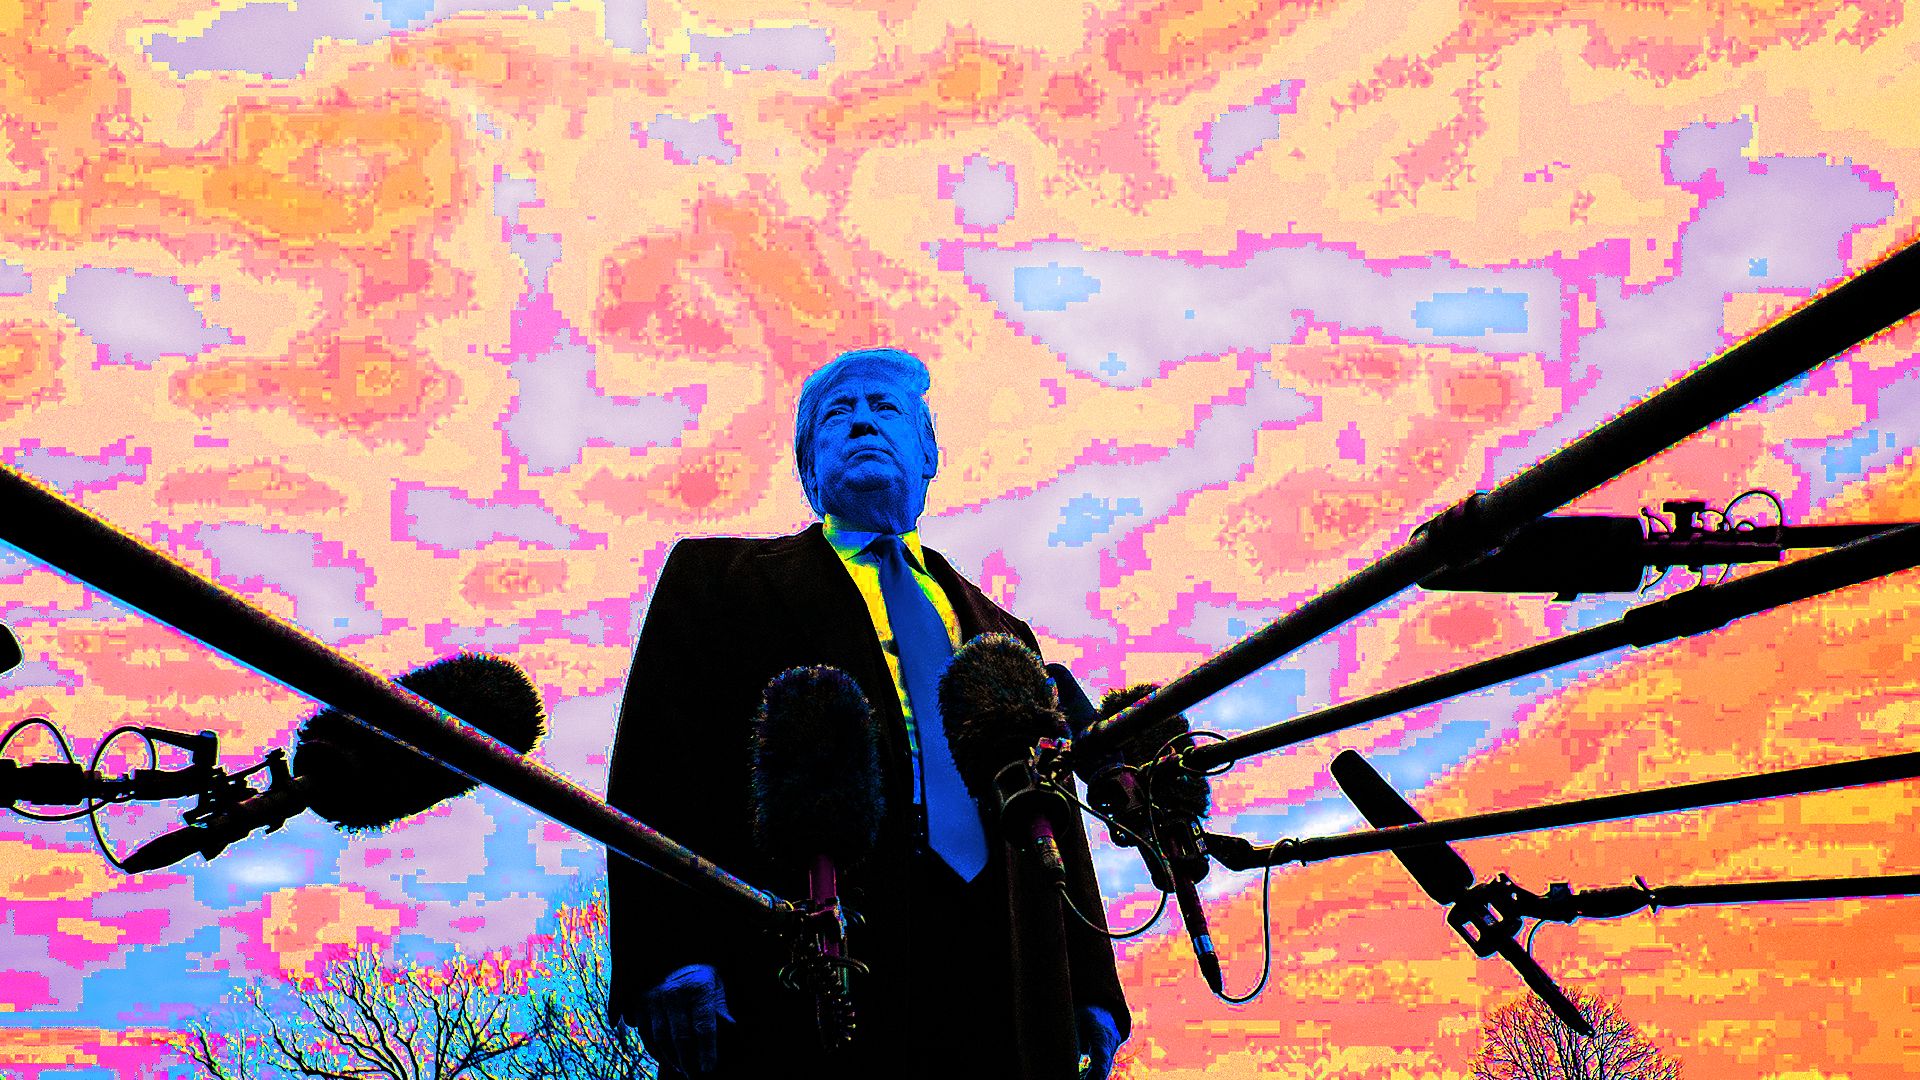 A photo of Trump speaking surrounded by fake-looking colors